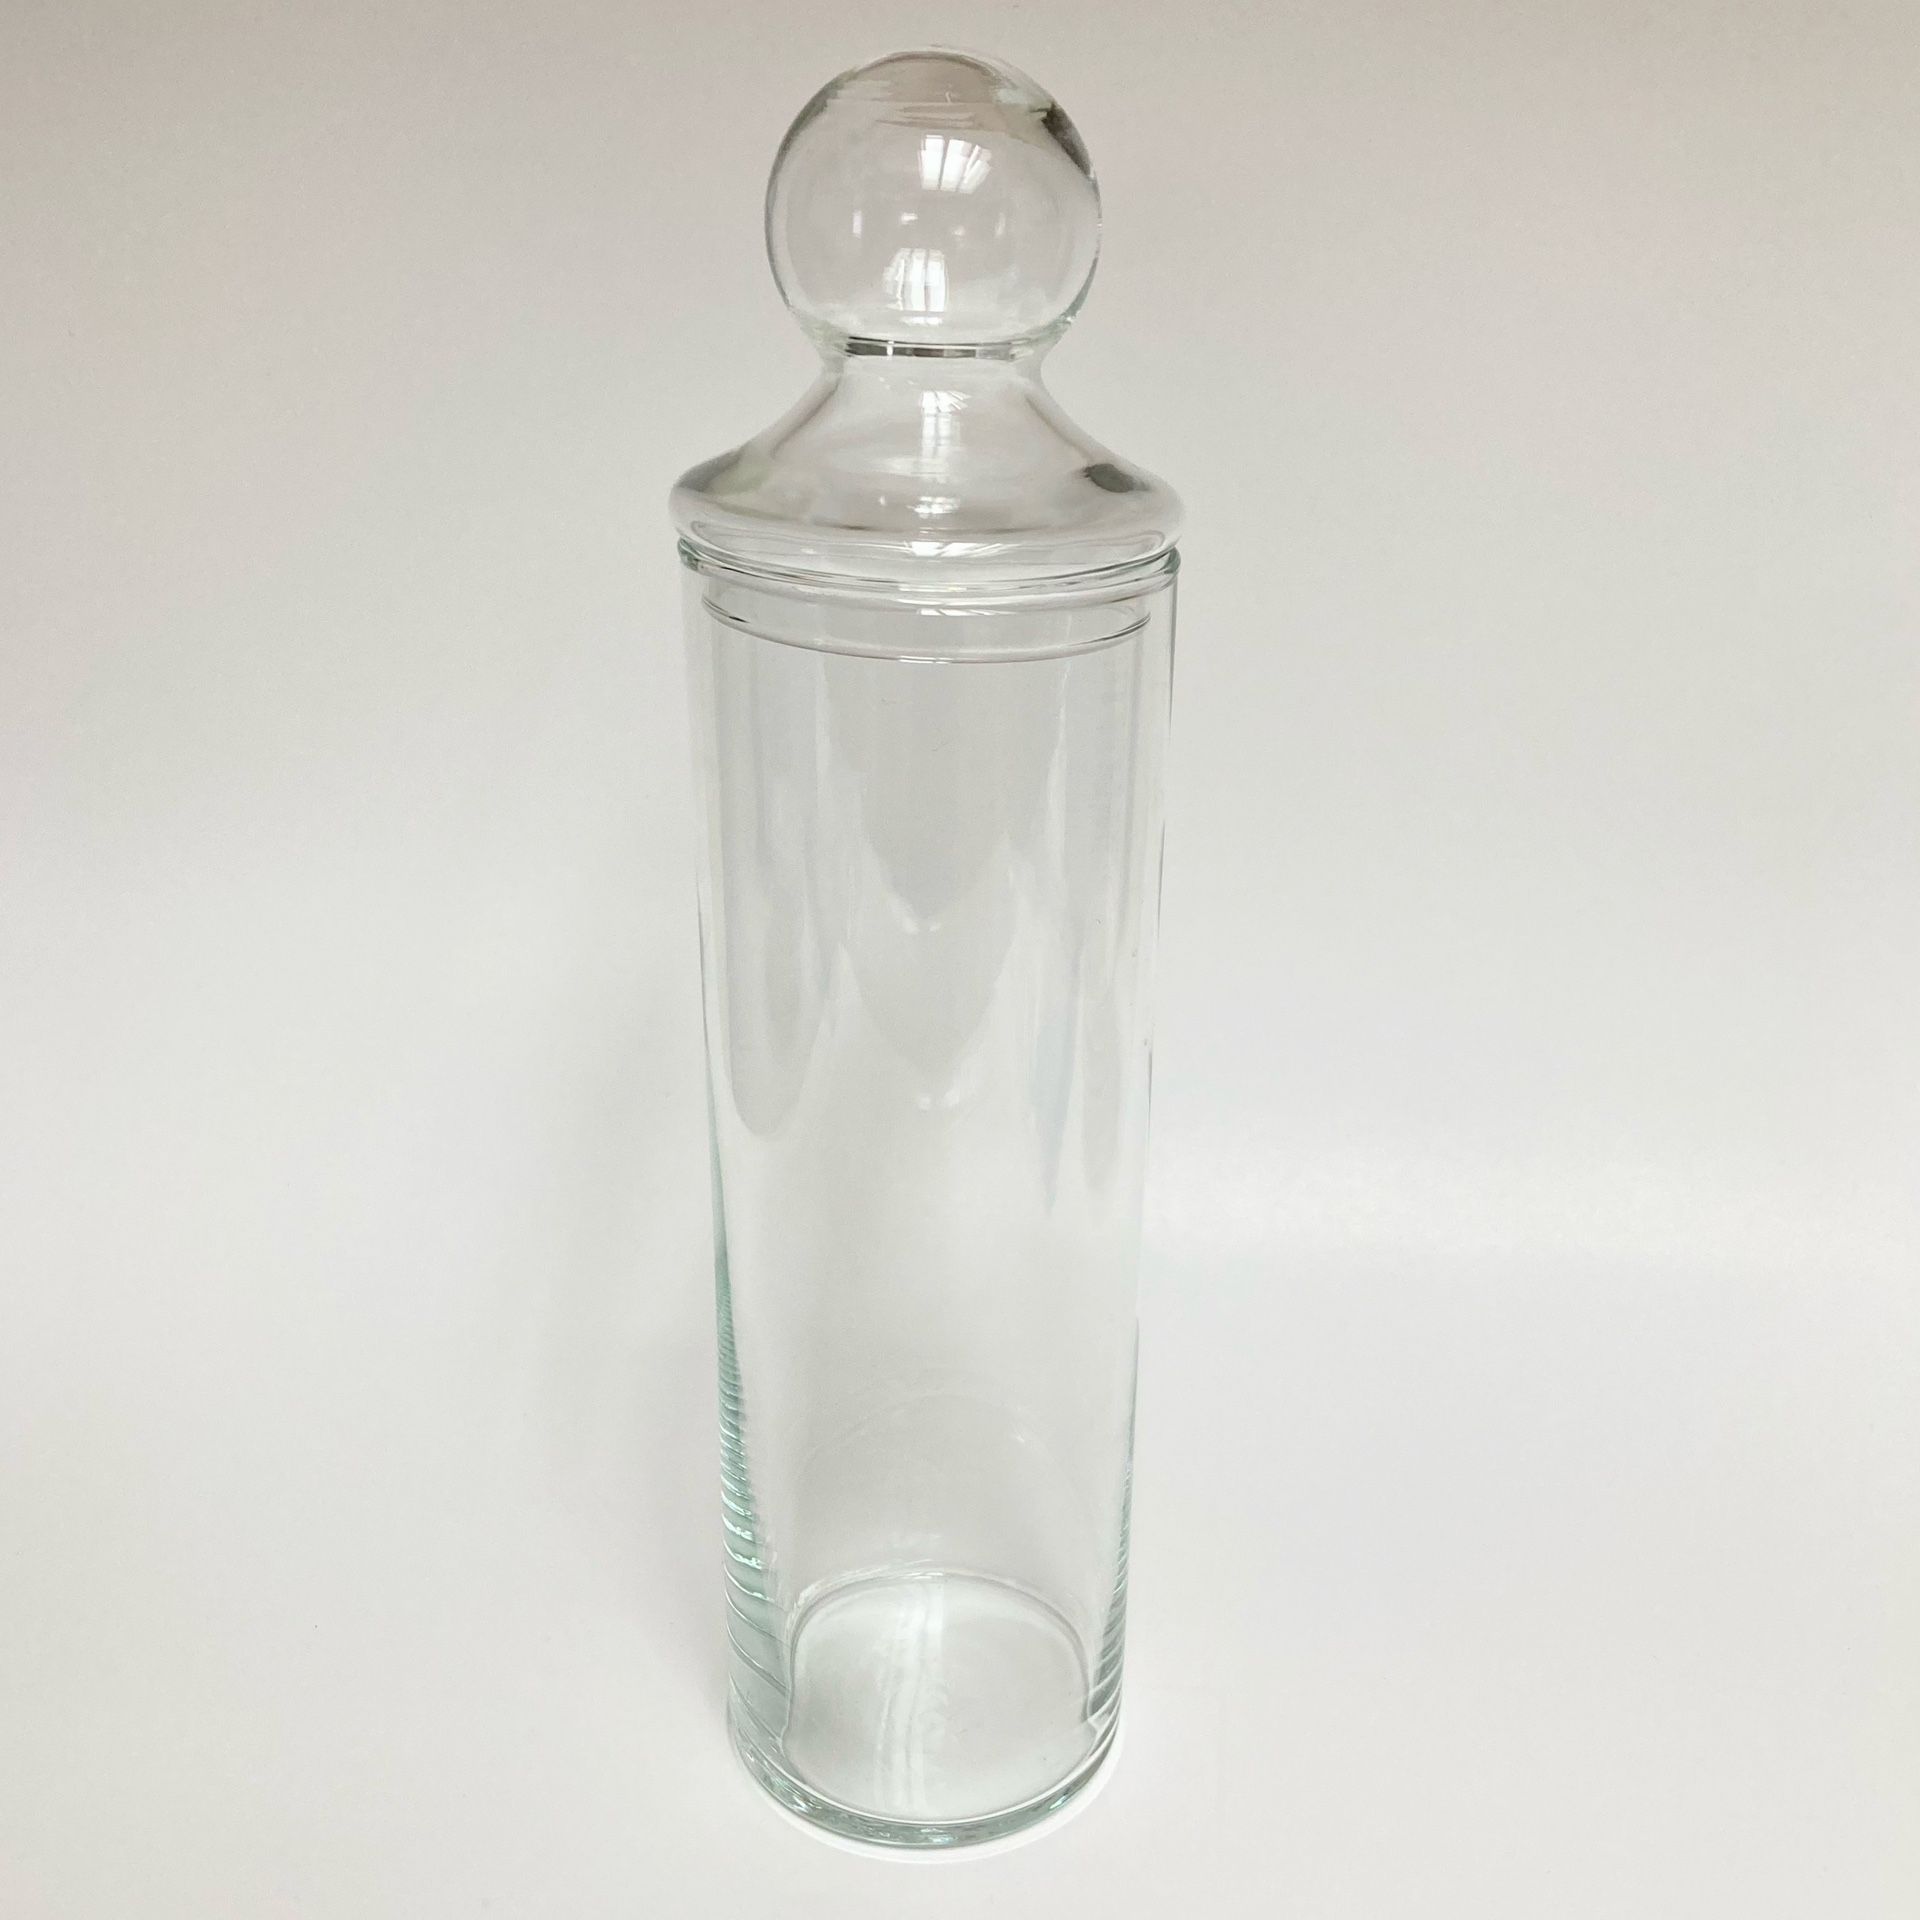 Vintage Libbey Tall Apothecary Canister with Knob Lid